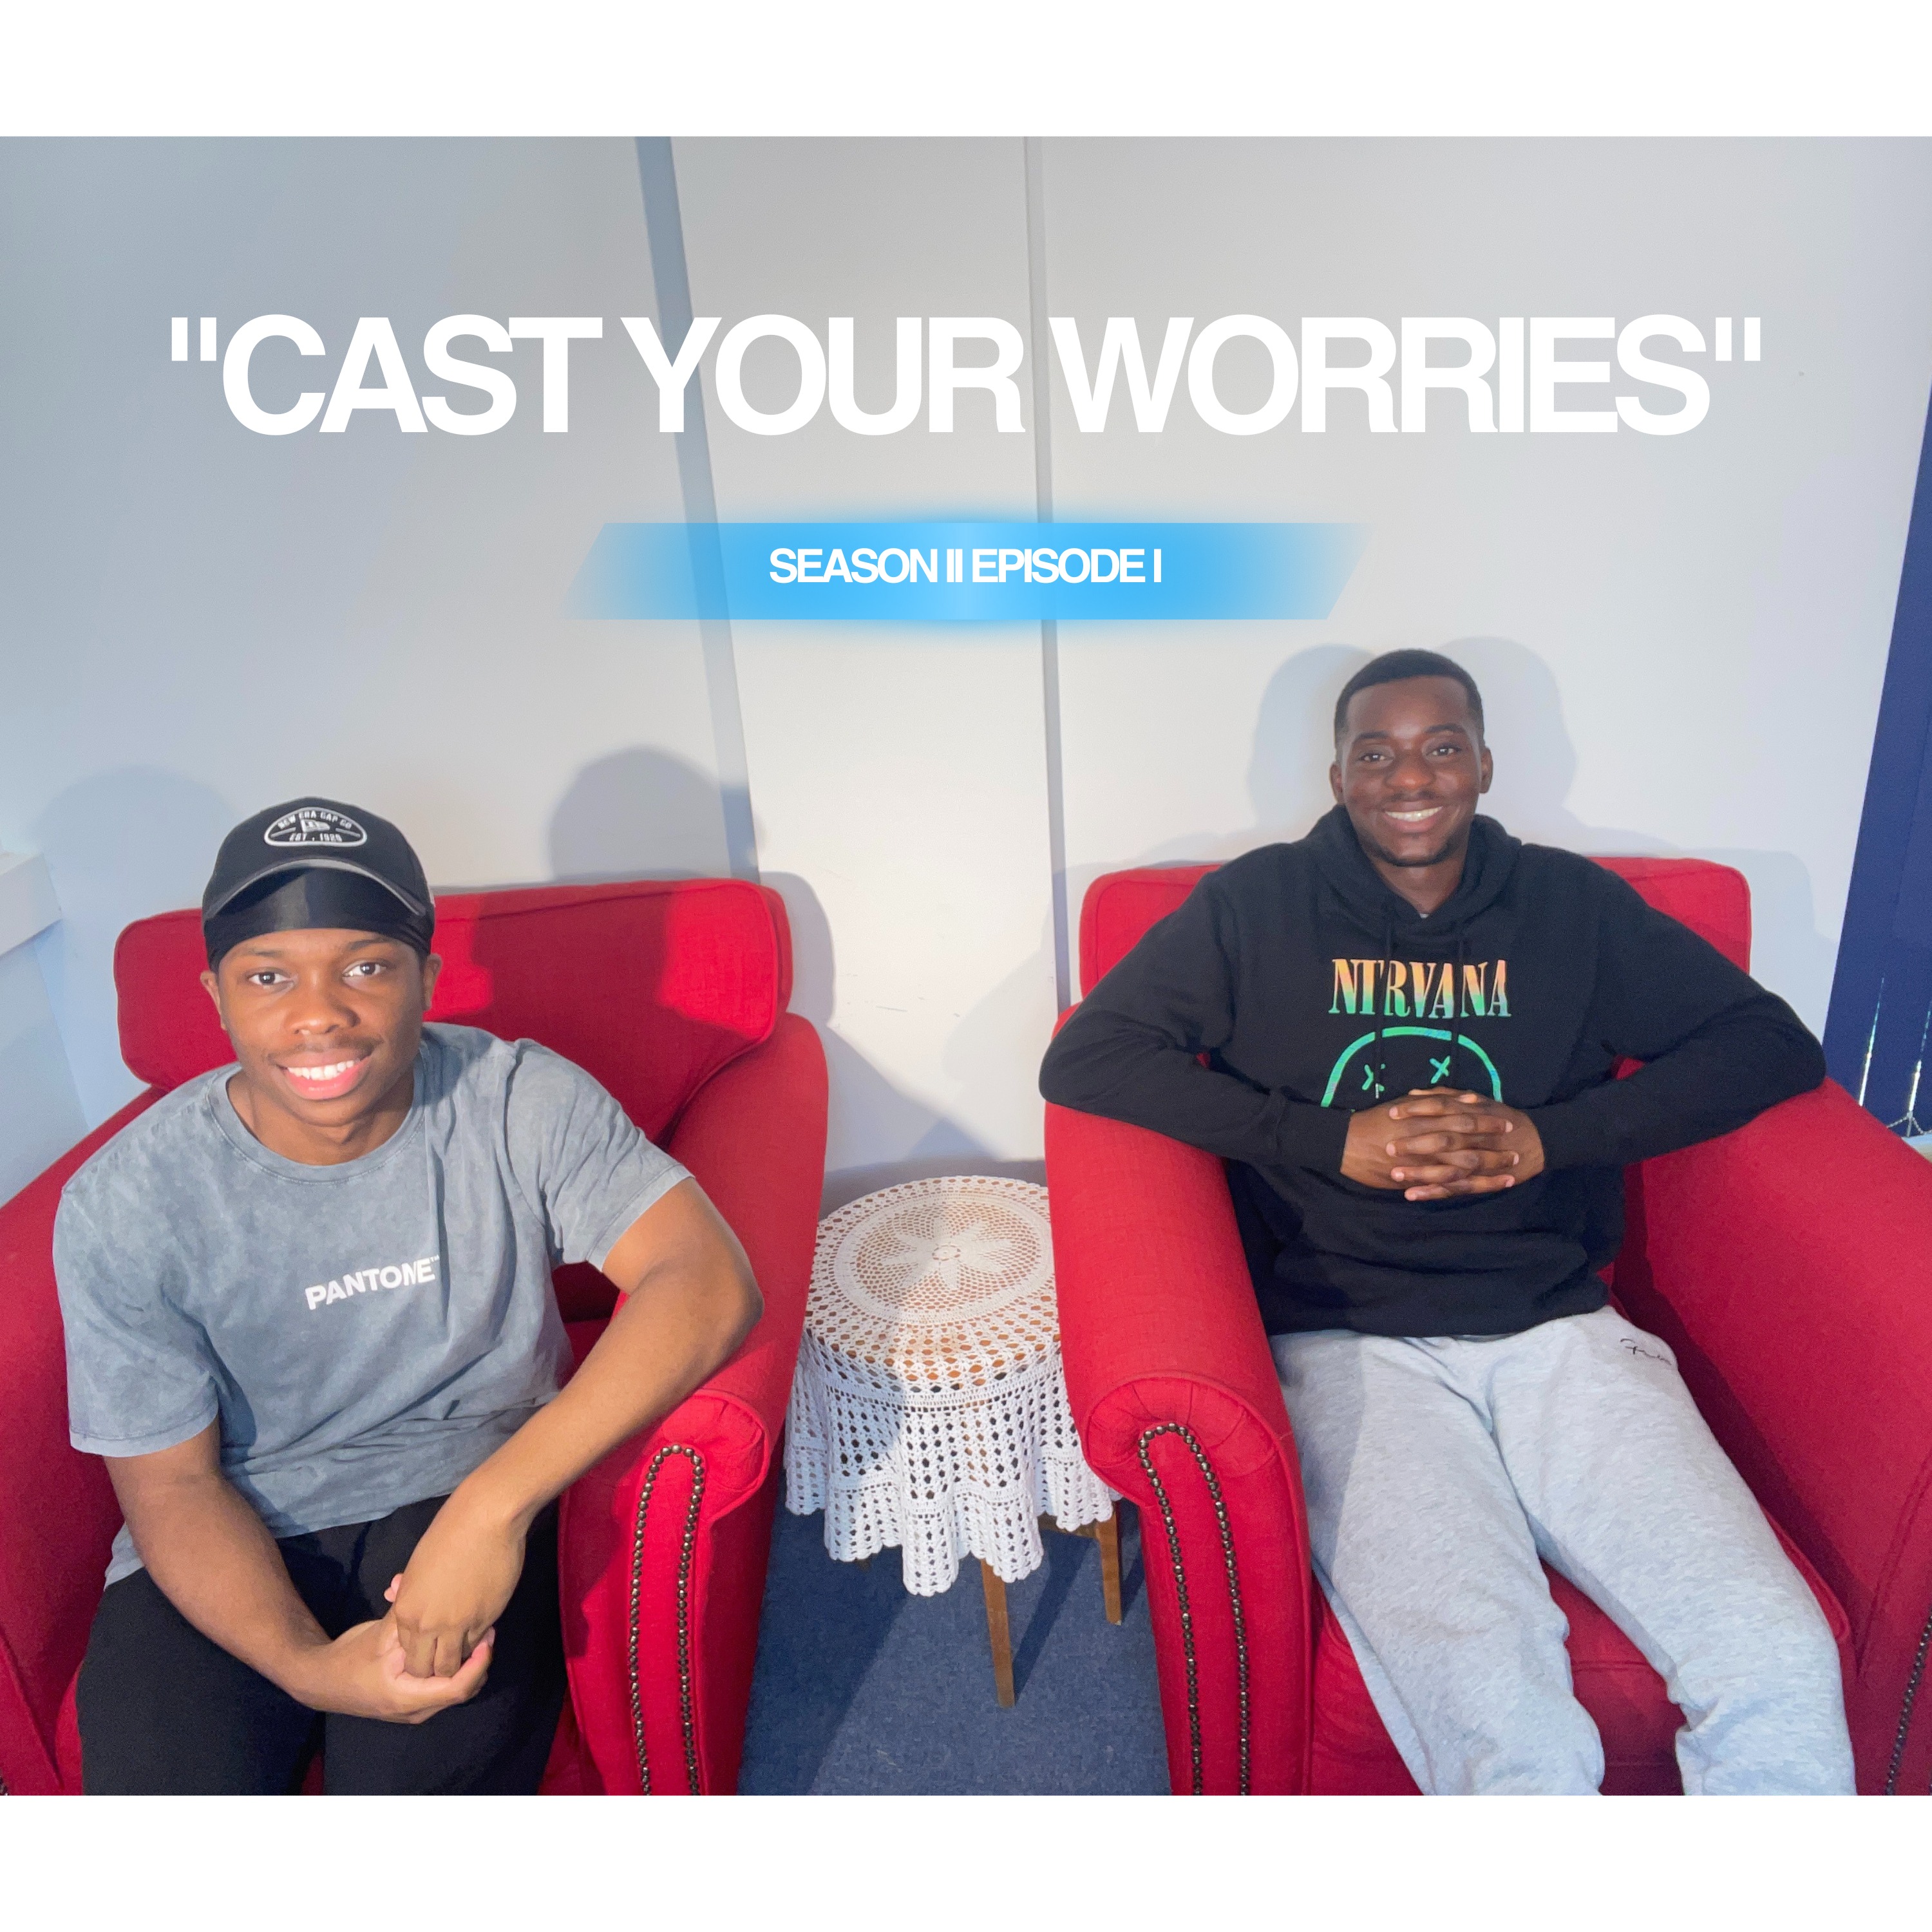 Letting Go, Social Anxiety and Evaluating Ourselves // ”Cast Your Worries” // S2E1